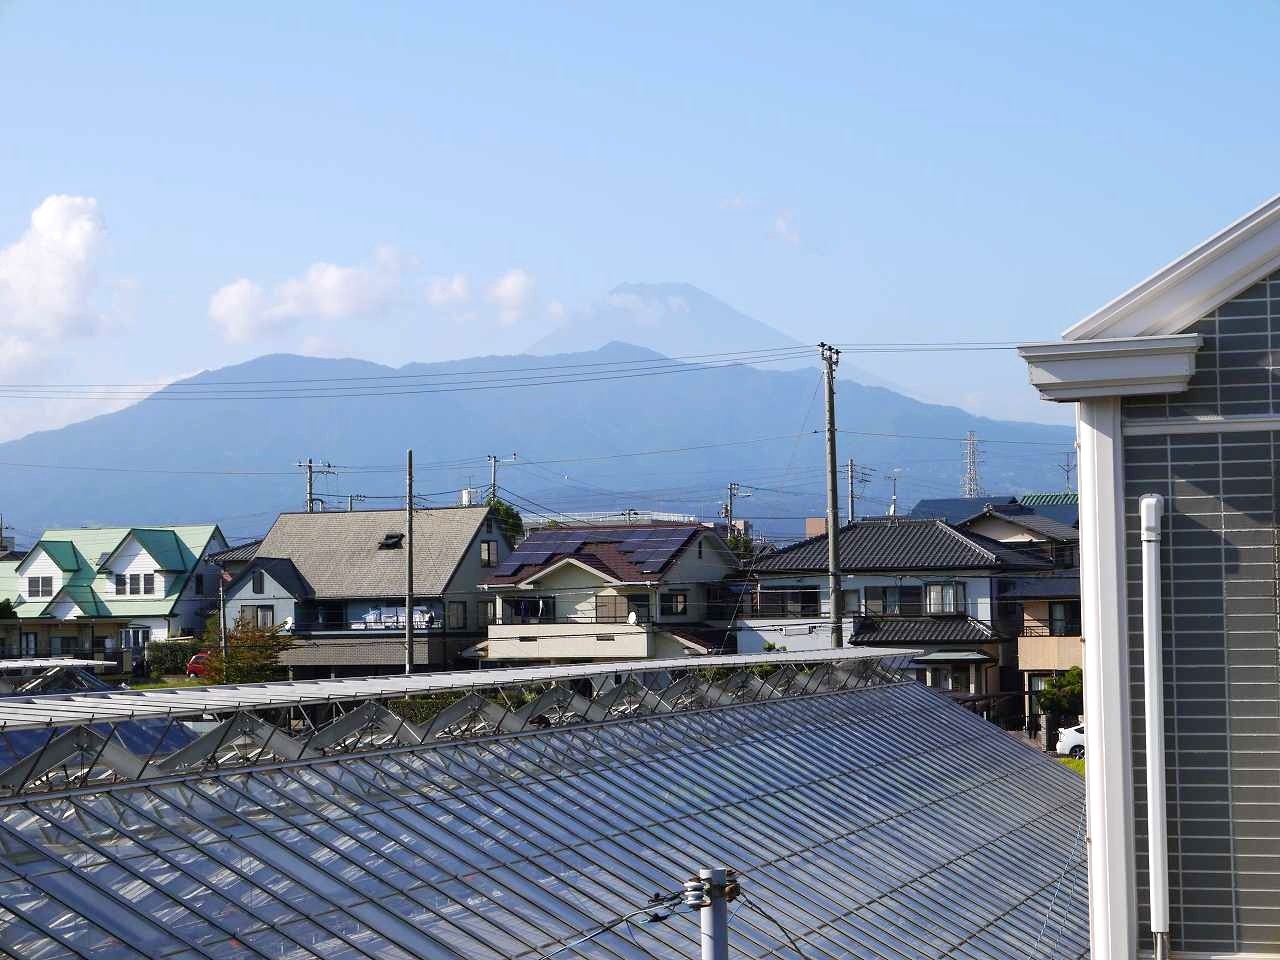 View. Mount Fuji is visible from the veranda